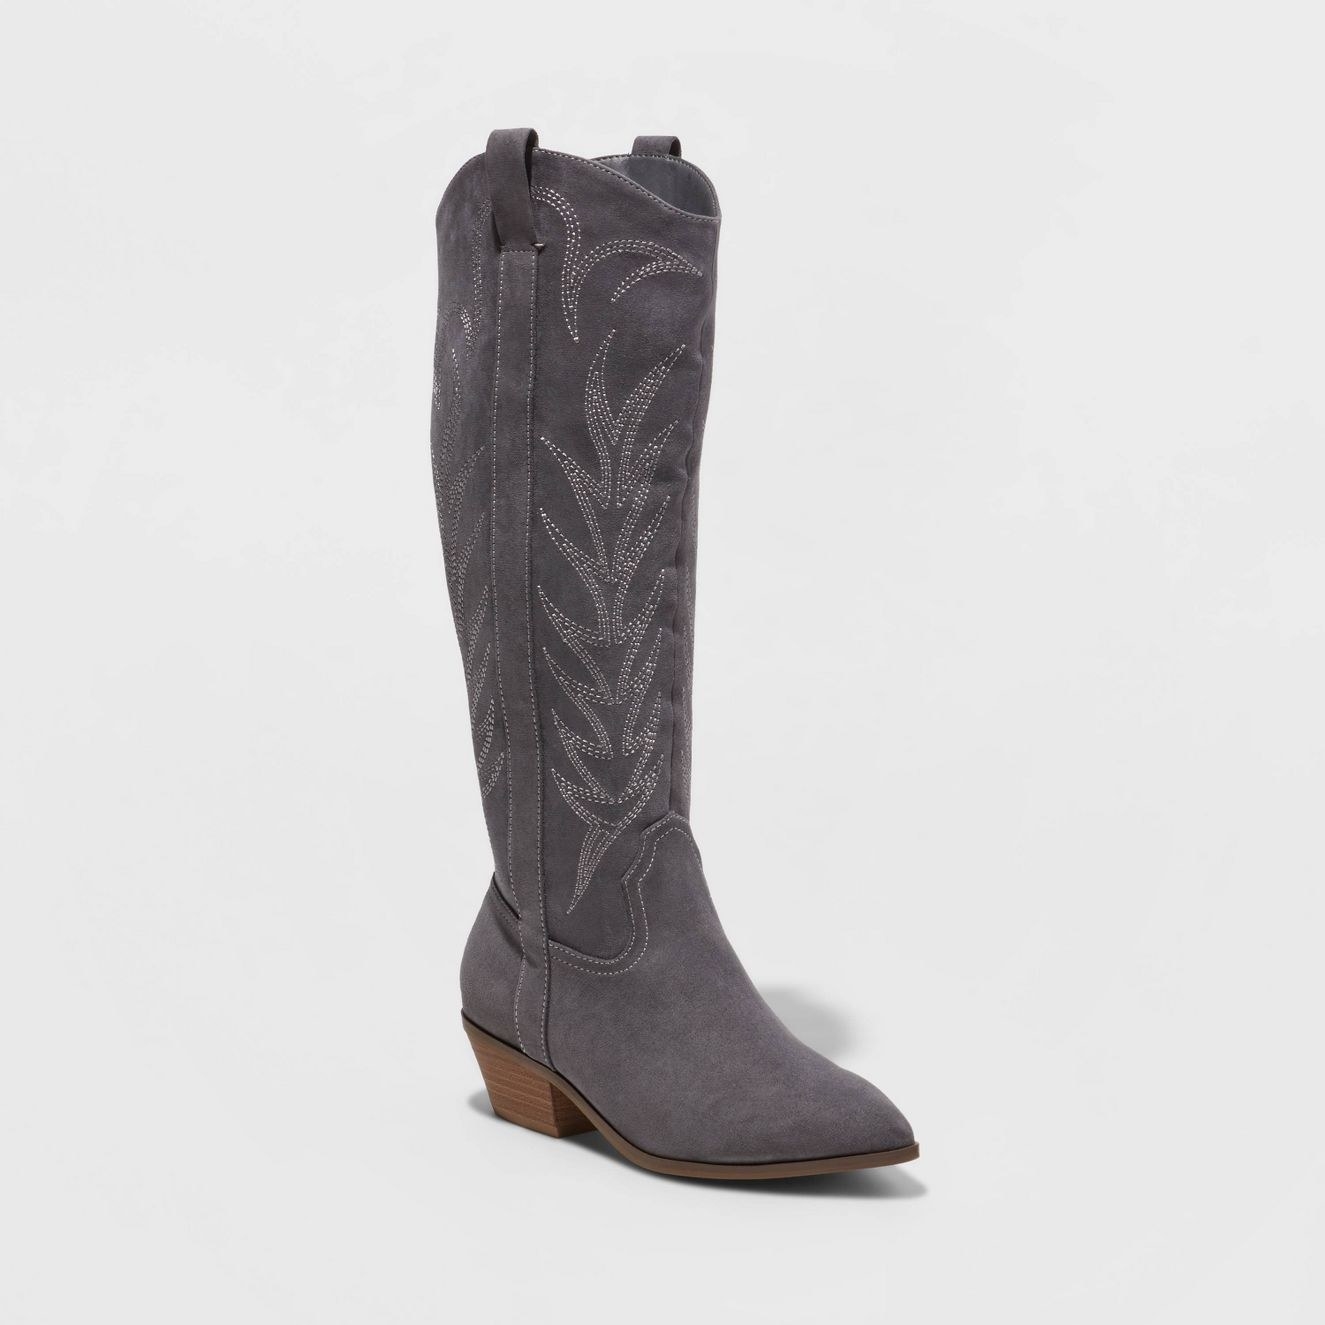 the gray boot